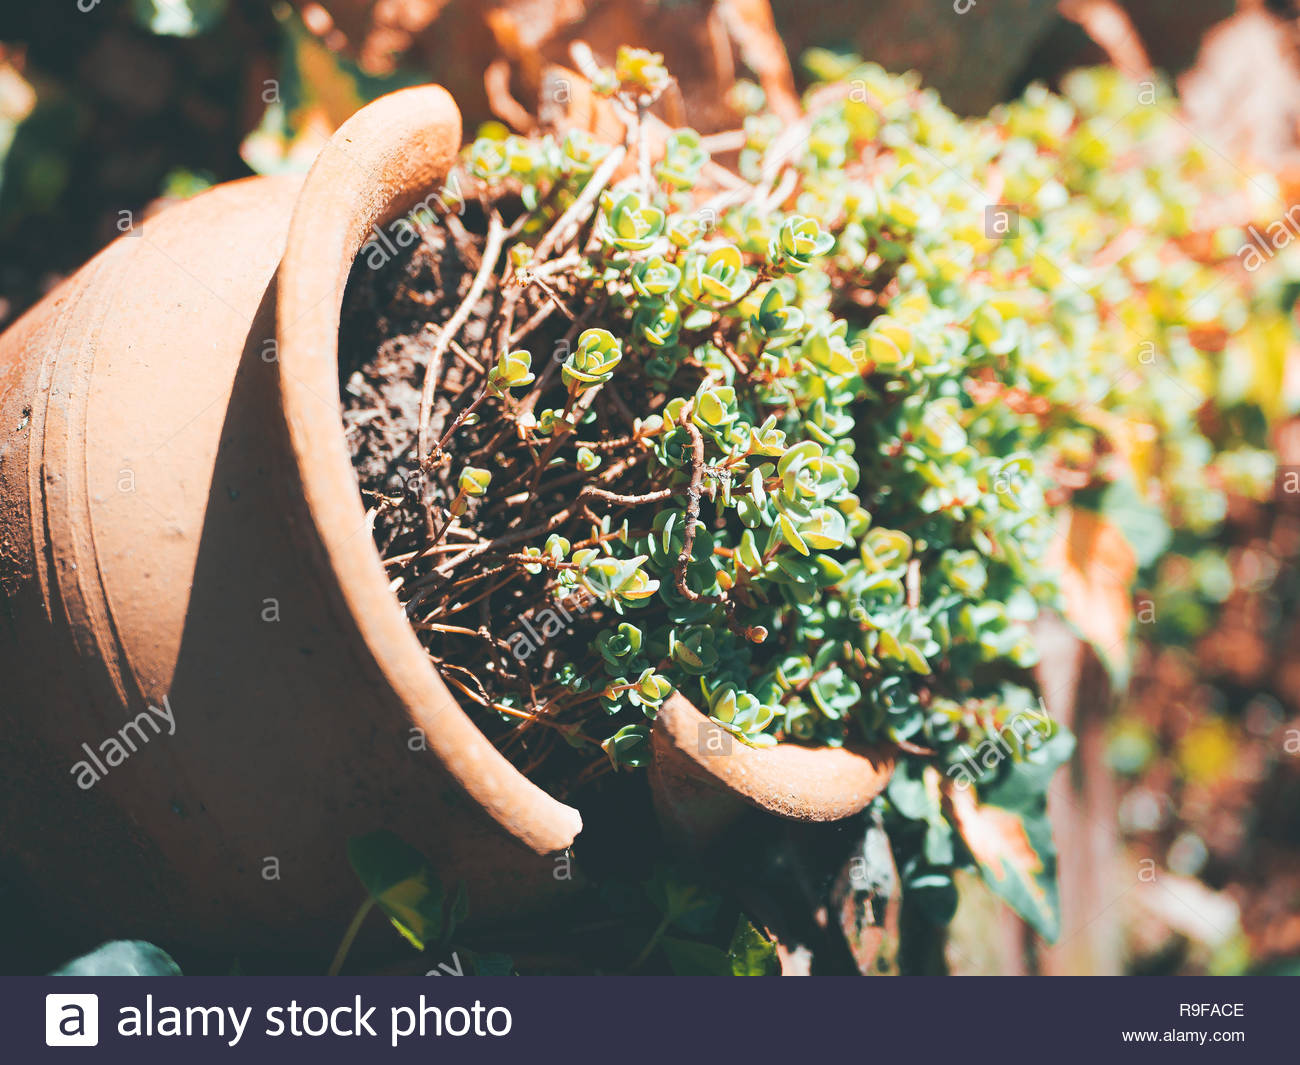 plant sedum in a broken pot on the ground at sunny day landscape design R9FACE